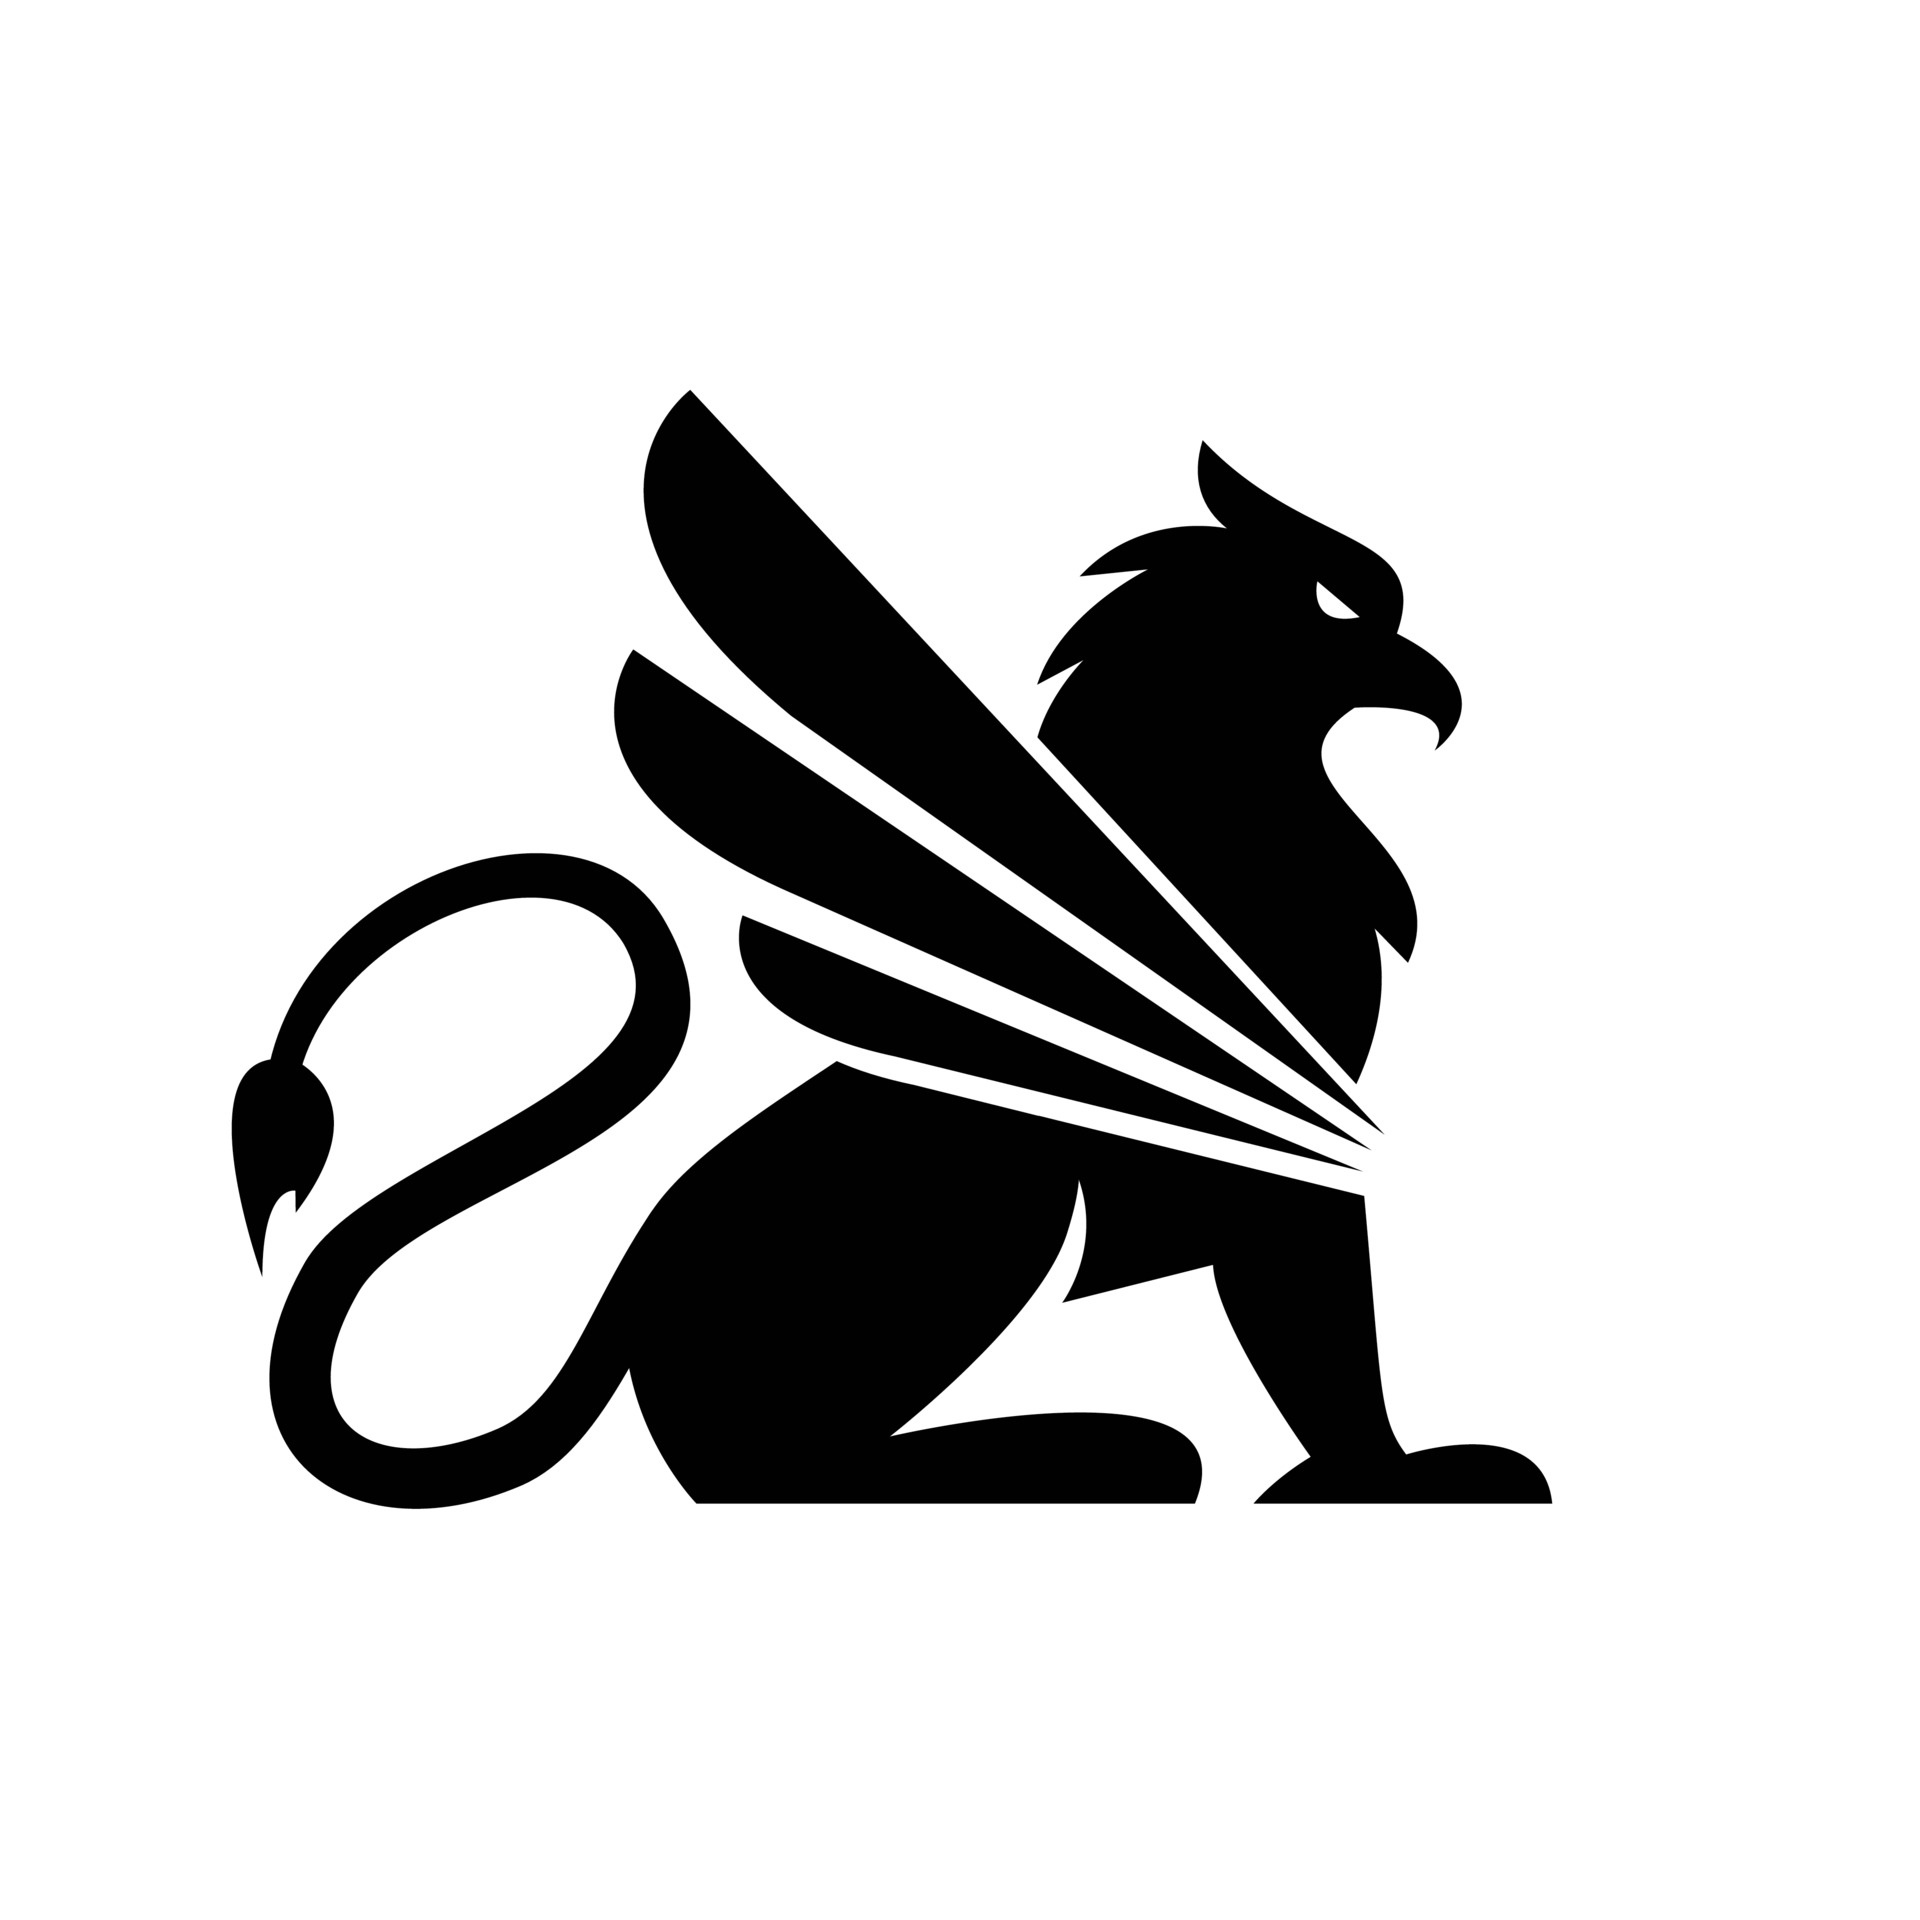 Griffins, Mythical creatures, Black minimal design, Mascot vector, 1920x1920 HD Phone